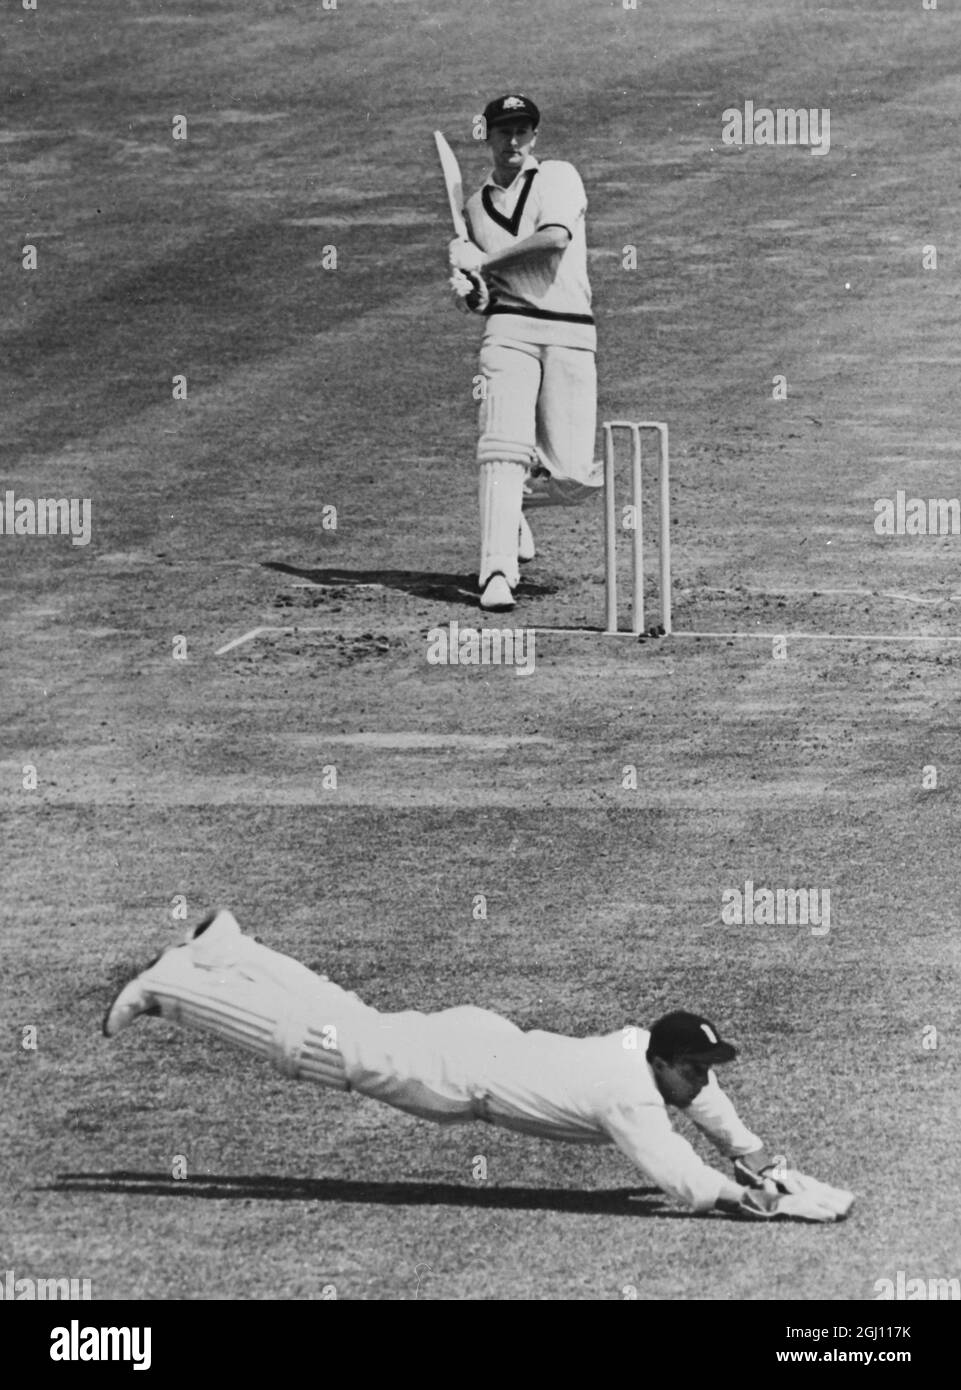 CRICKET PLAYER J MURRAY IN ACTION 23 JUNE 1961 Stock Photo